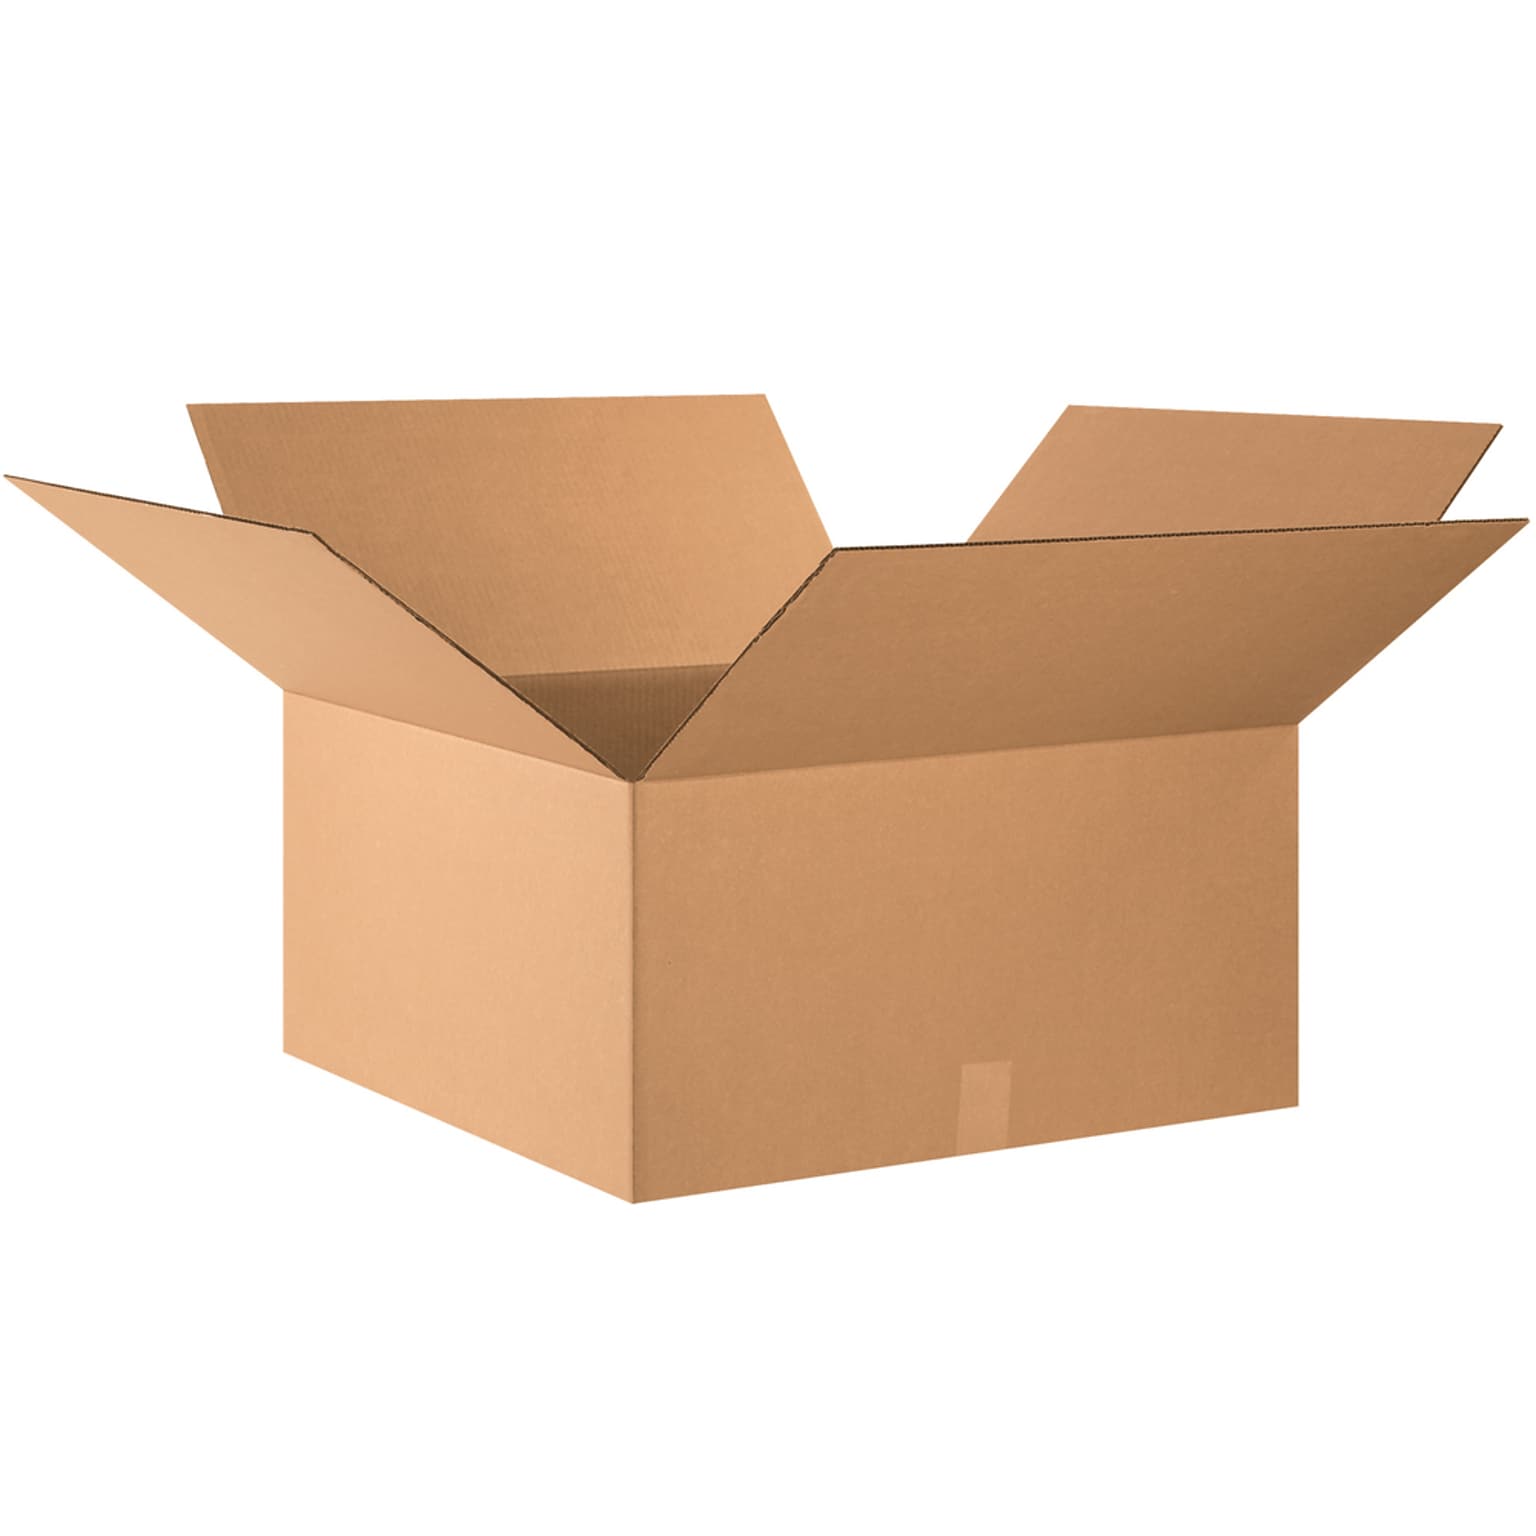 SI Products 24 x 24 x 12 Corrugated Shipping Boxes, 200#/ECT-32 Mullen Rated Corrugated, Pack of 10, (242412)